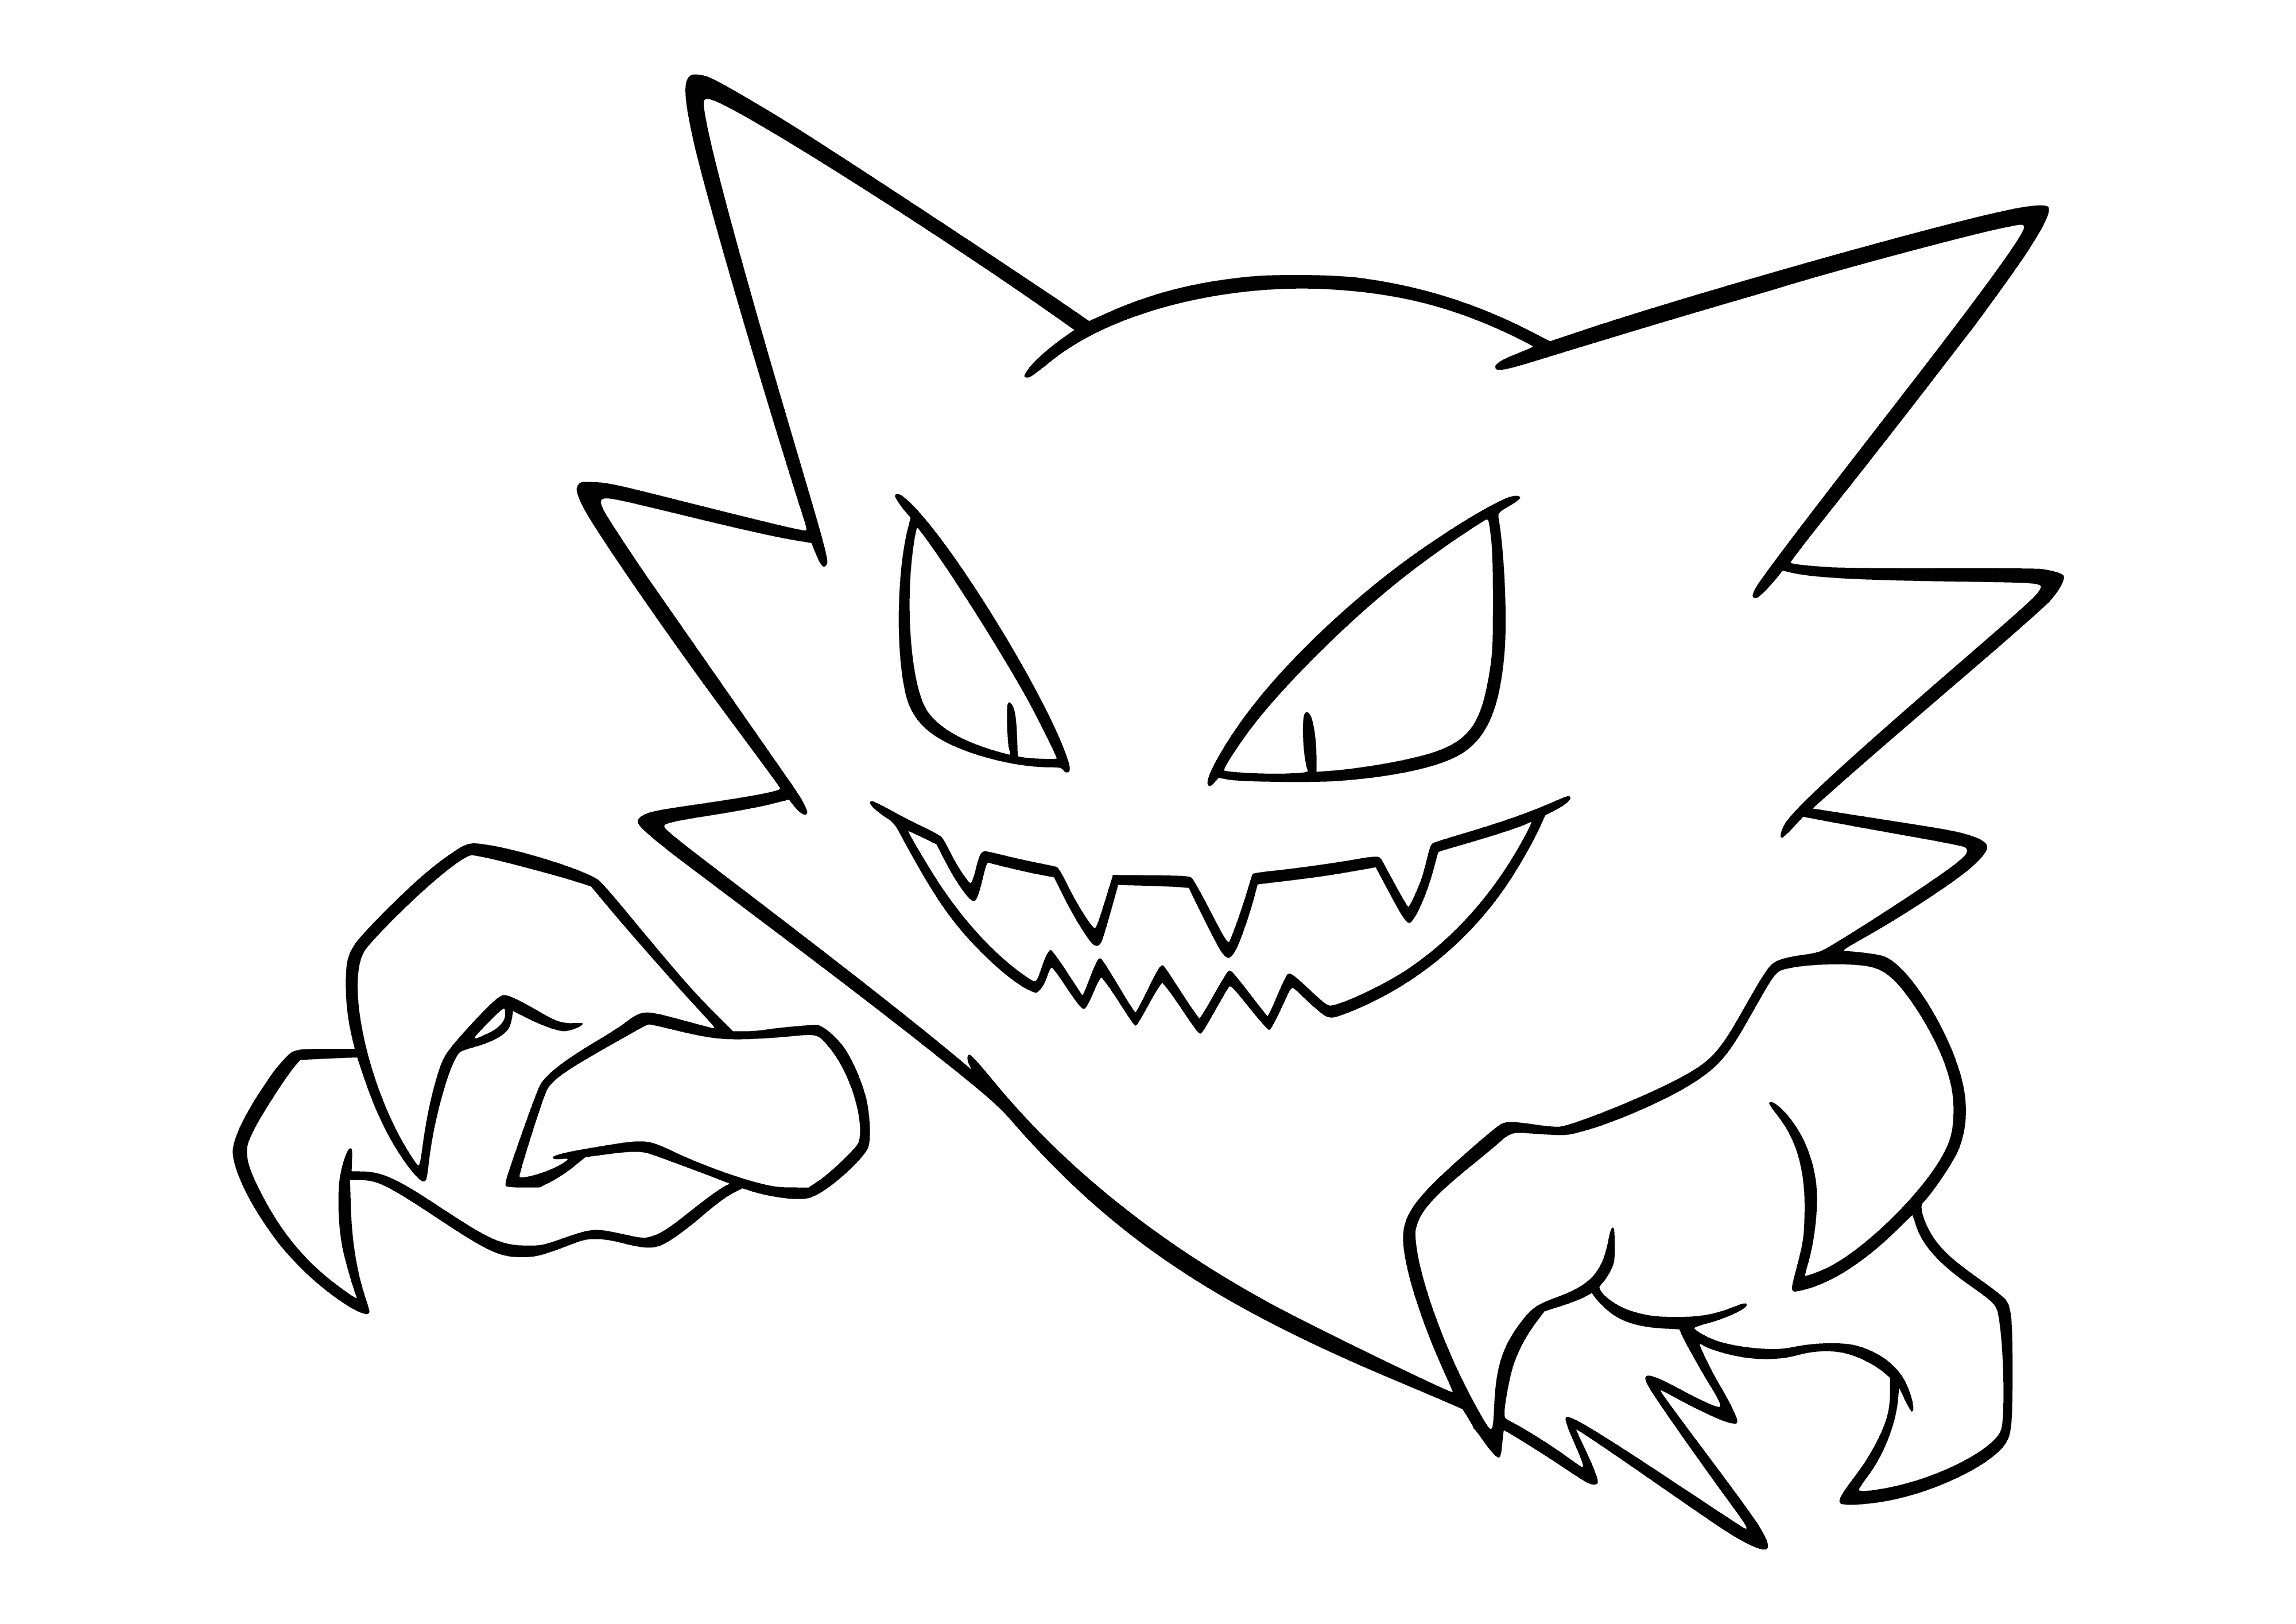 coloring page: Ghost-type Pokemon Haunter evolves into Gengar. Its features include a large mouth, red eyes, and claw-like fingers.